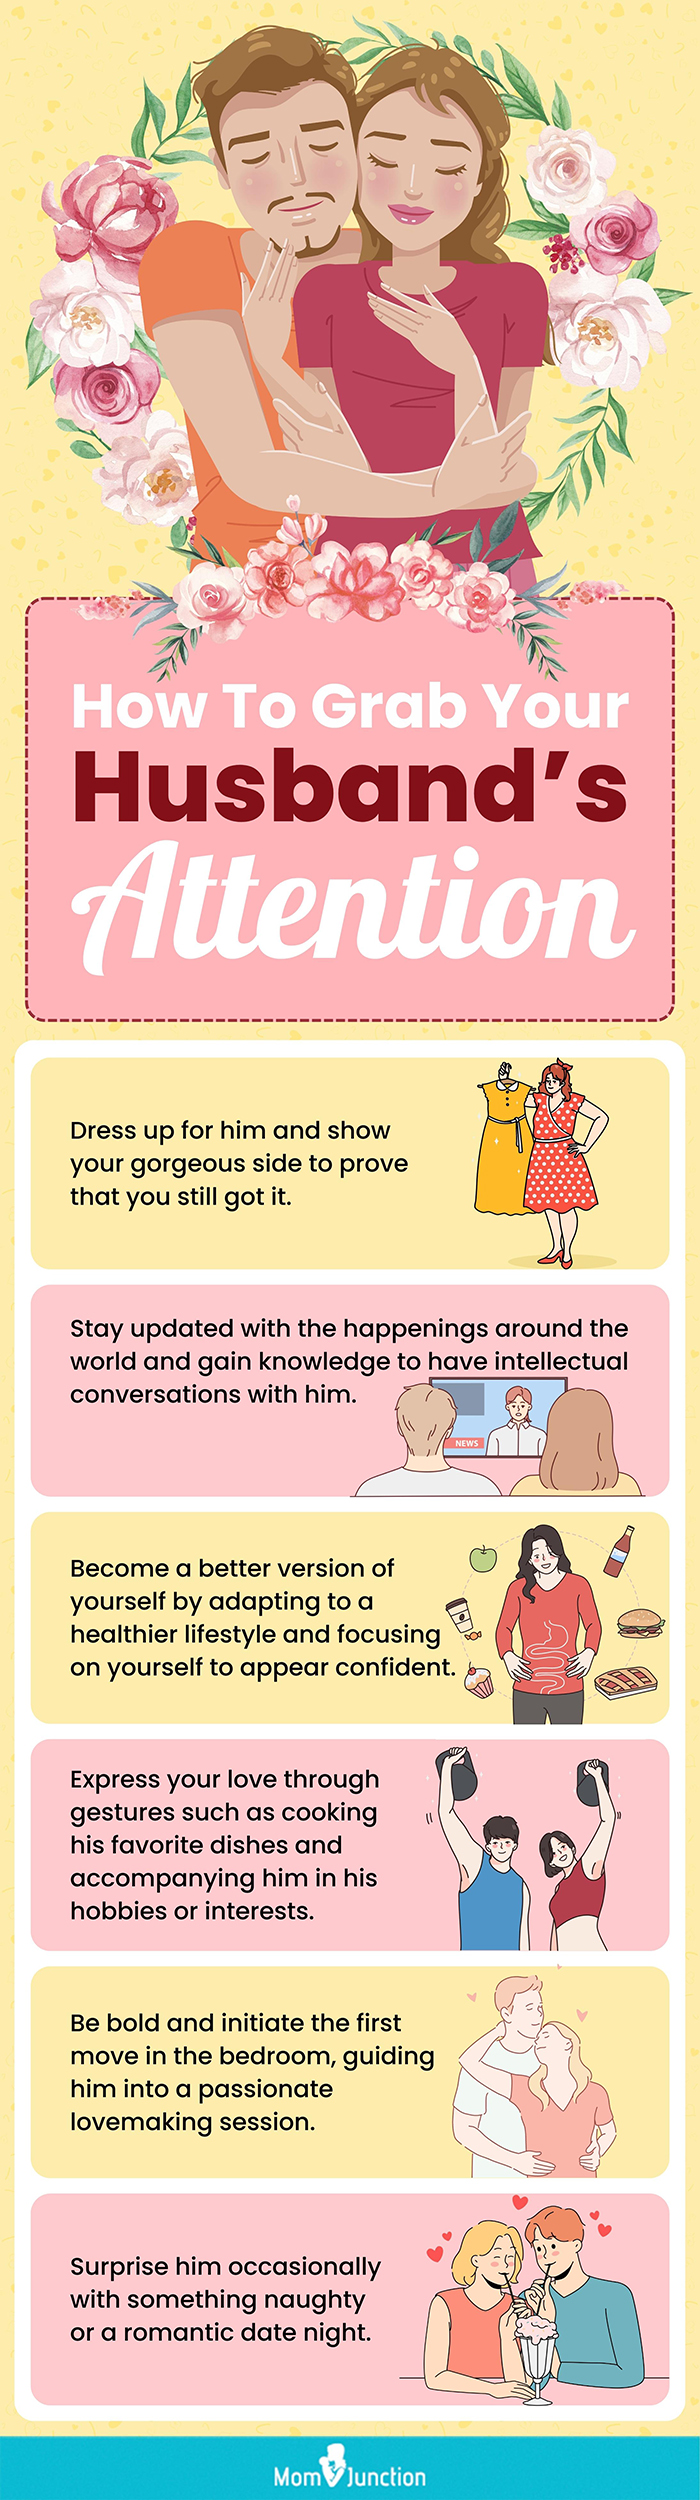 how to grab your husbands attention (infographic)